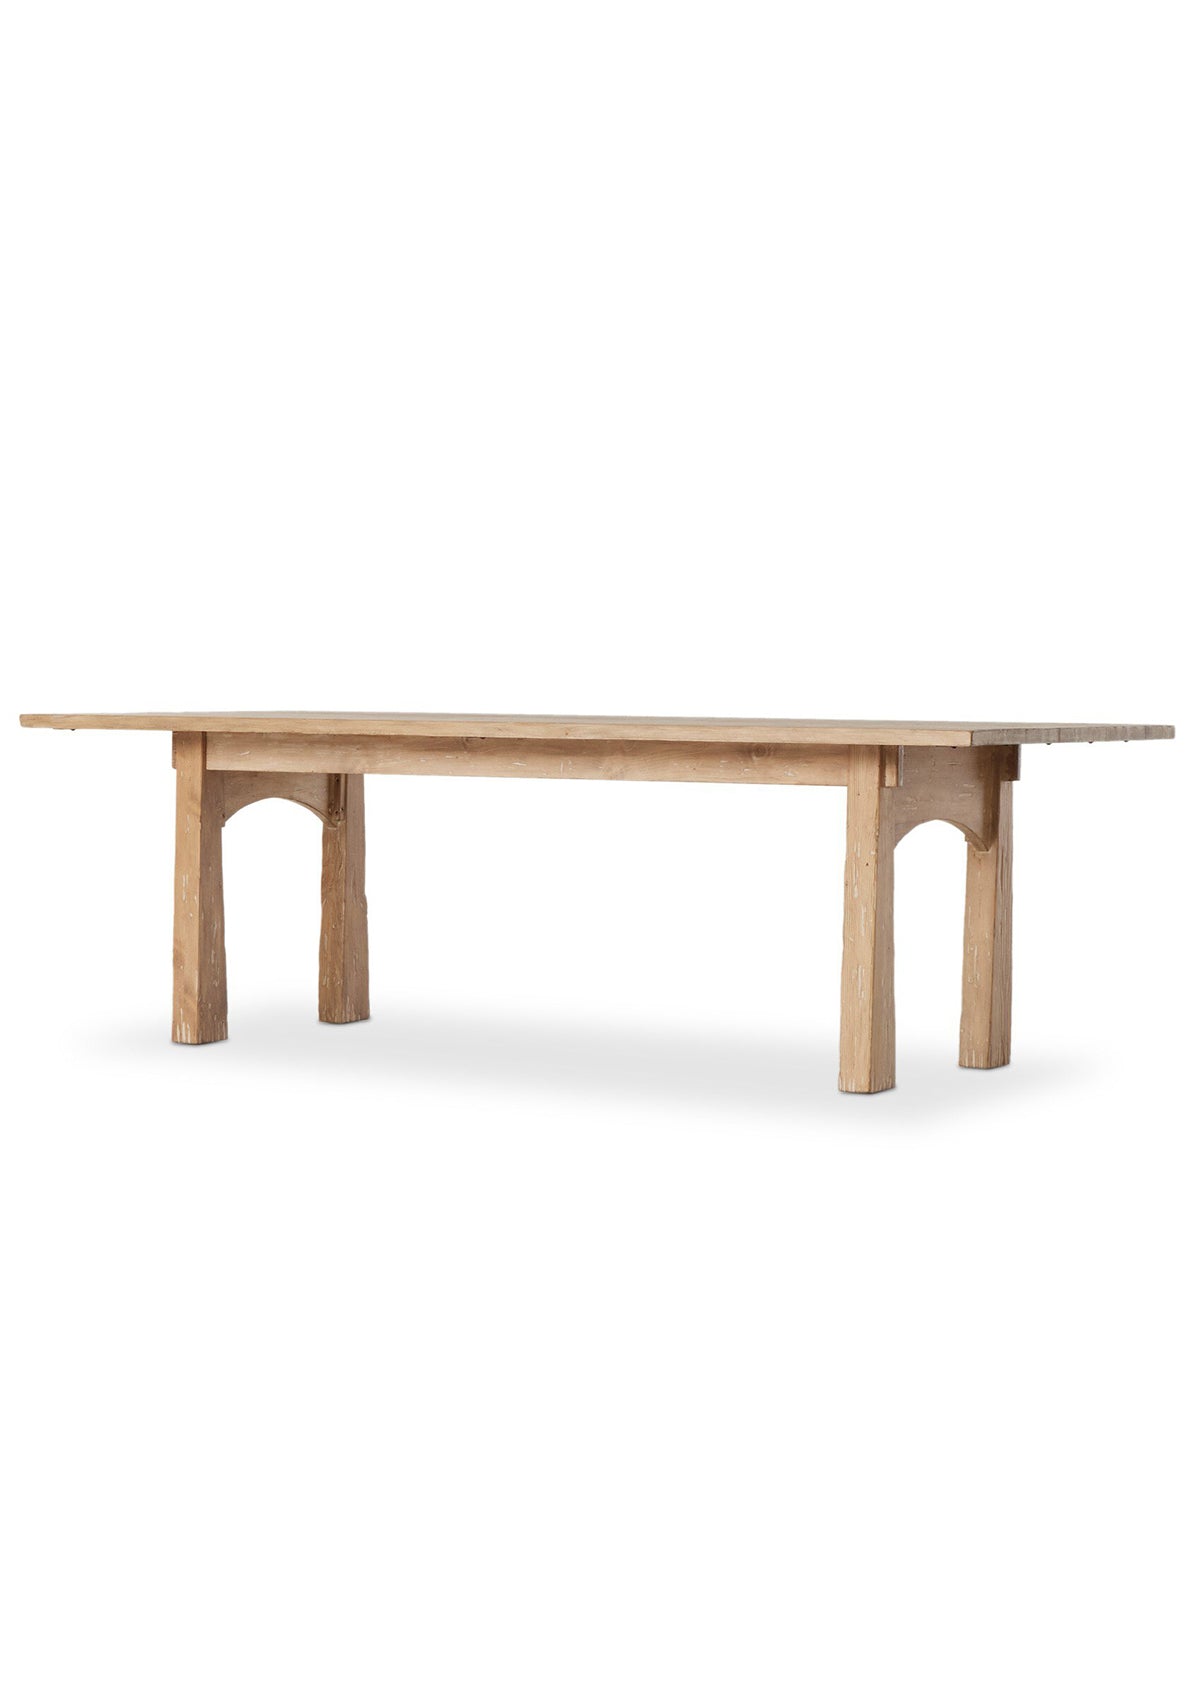 Cormac Dining Table